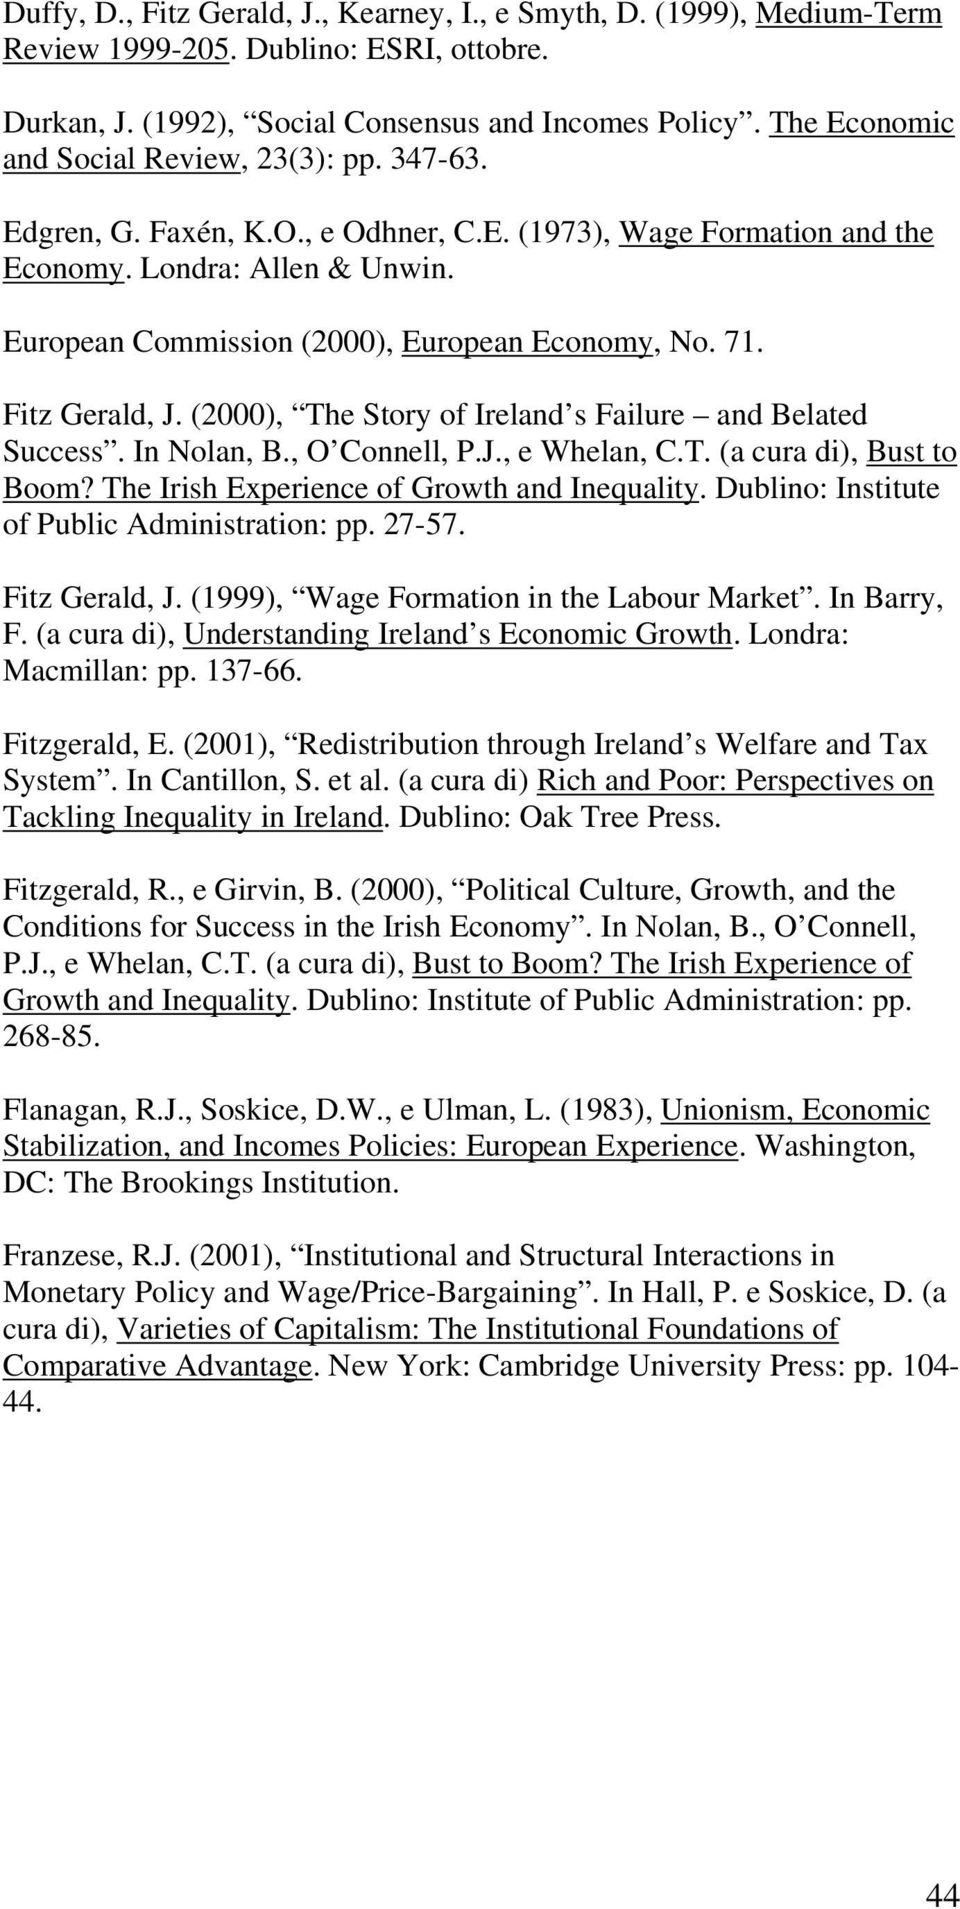 European Commission (2000), European Economy, No. 71. Fitz Gerald, J. (2000), The Story of Ireland s Failure and Belated Success. In Nolan, B., O Connell, P.J., e Whelan, C.T. (a cura di), Bust to Boom?